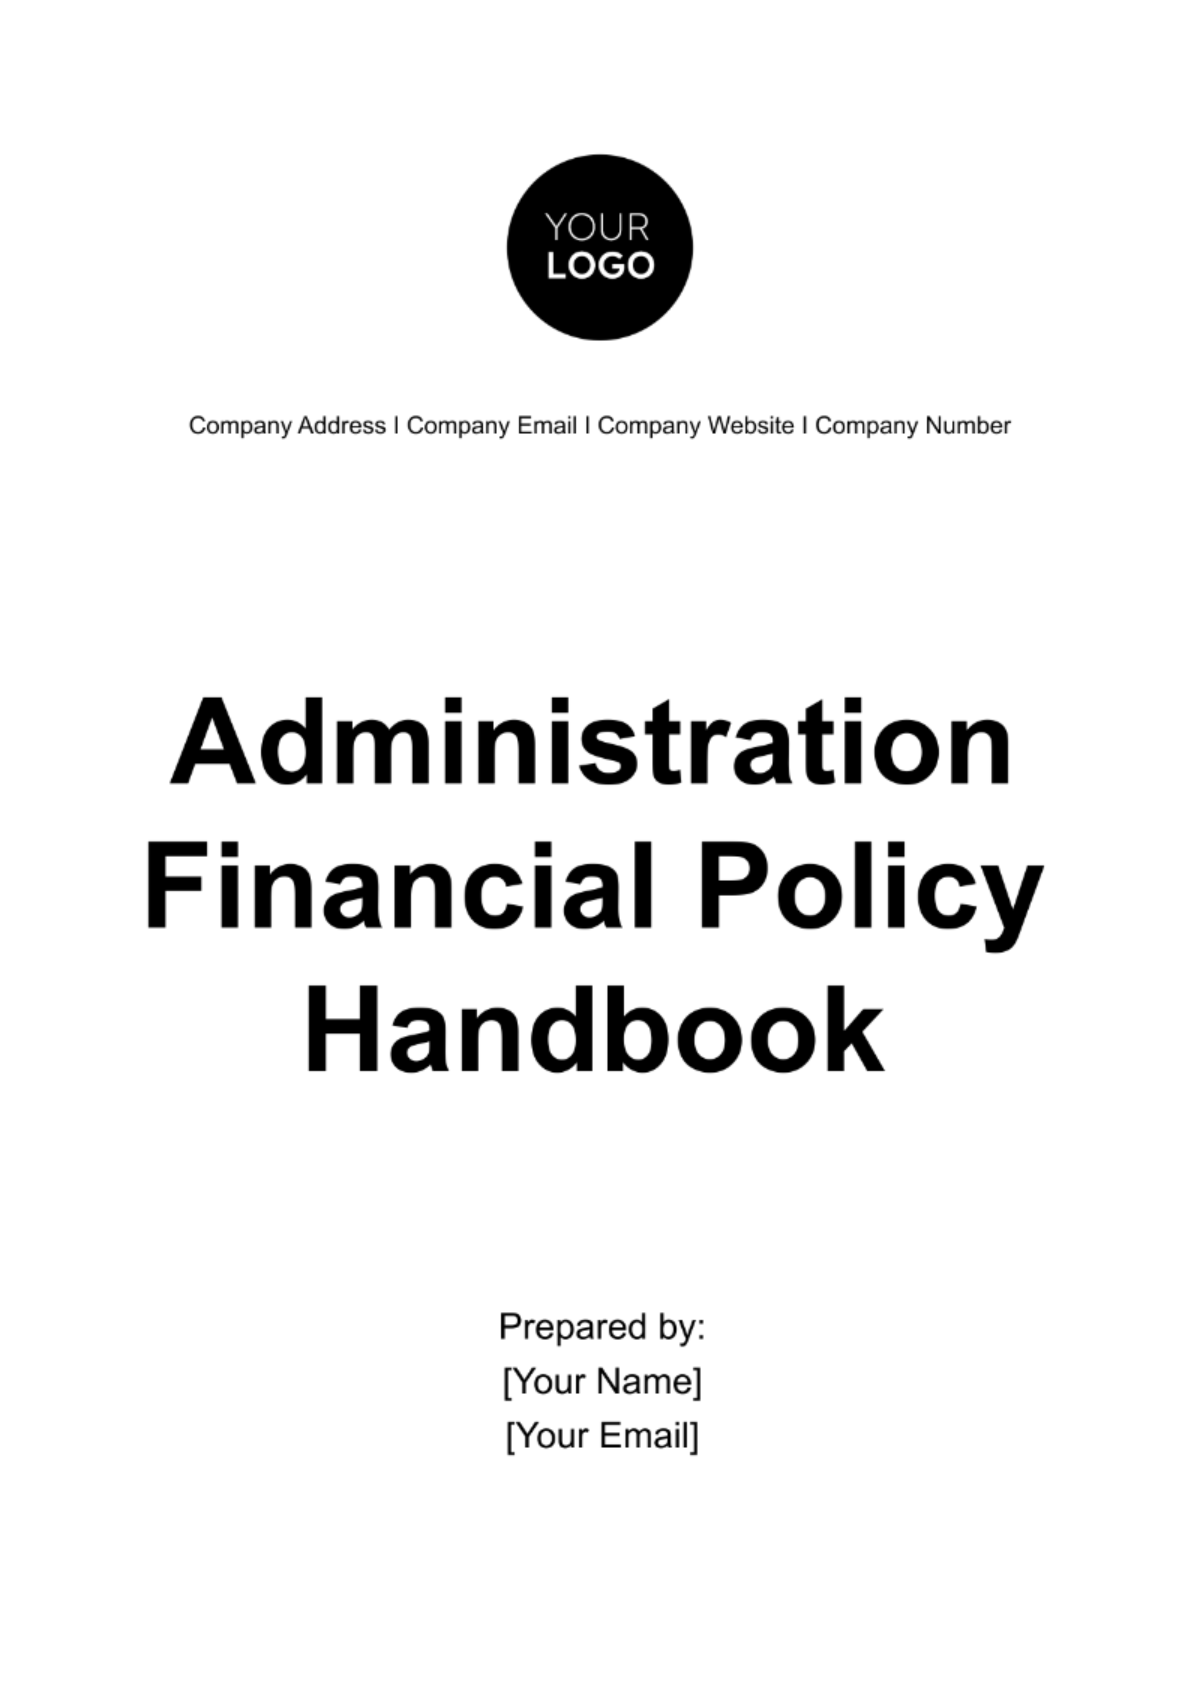 Administration Financial Policy Handbook Template